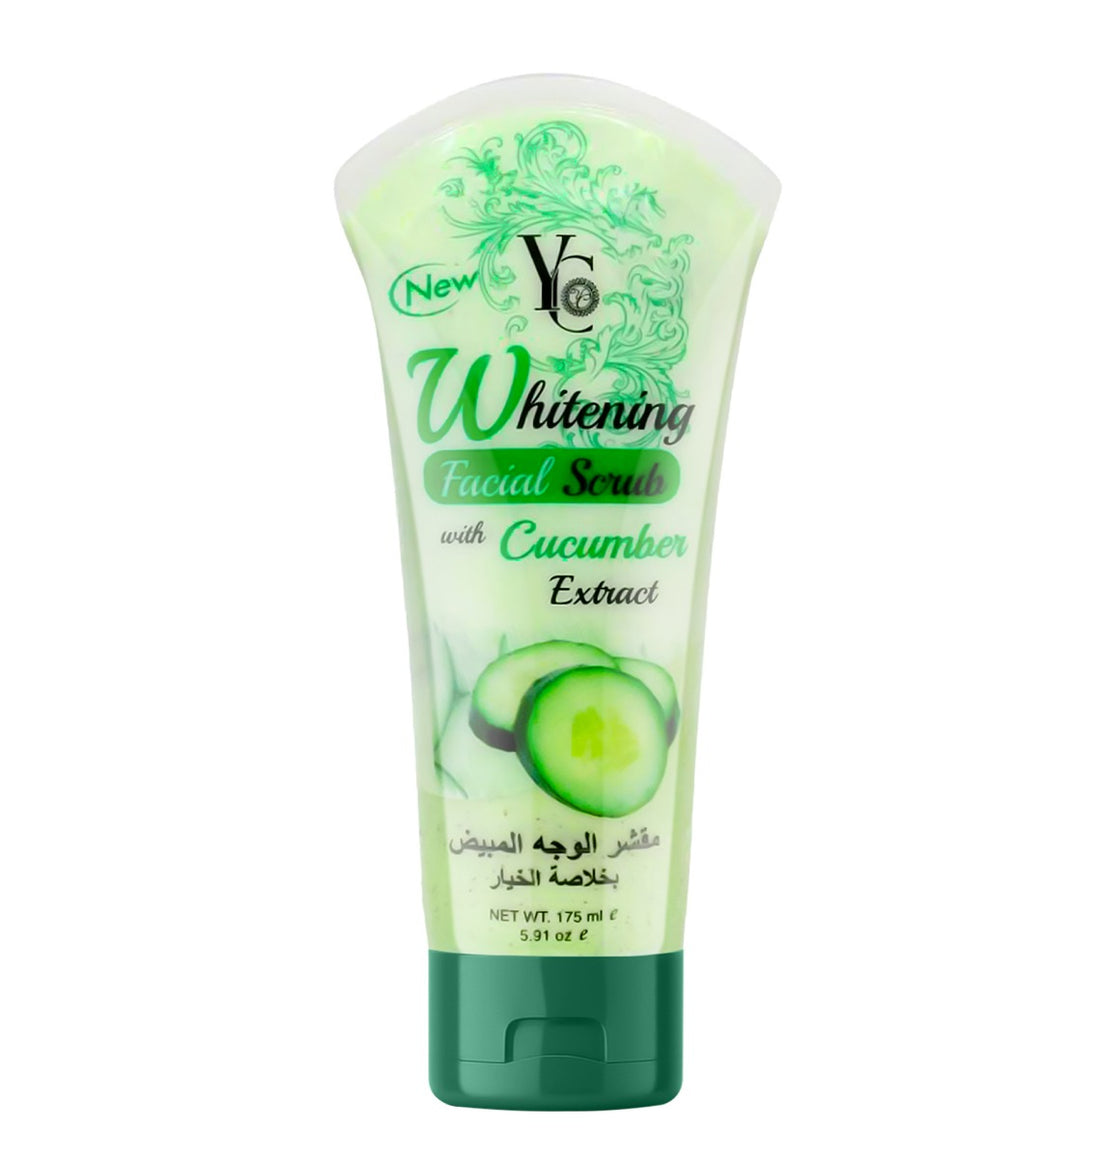 YC Whitening Facial Scrub With Cucumber Extract (175ml)